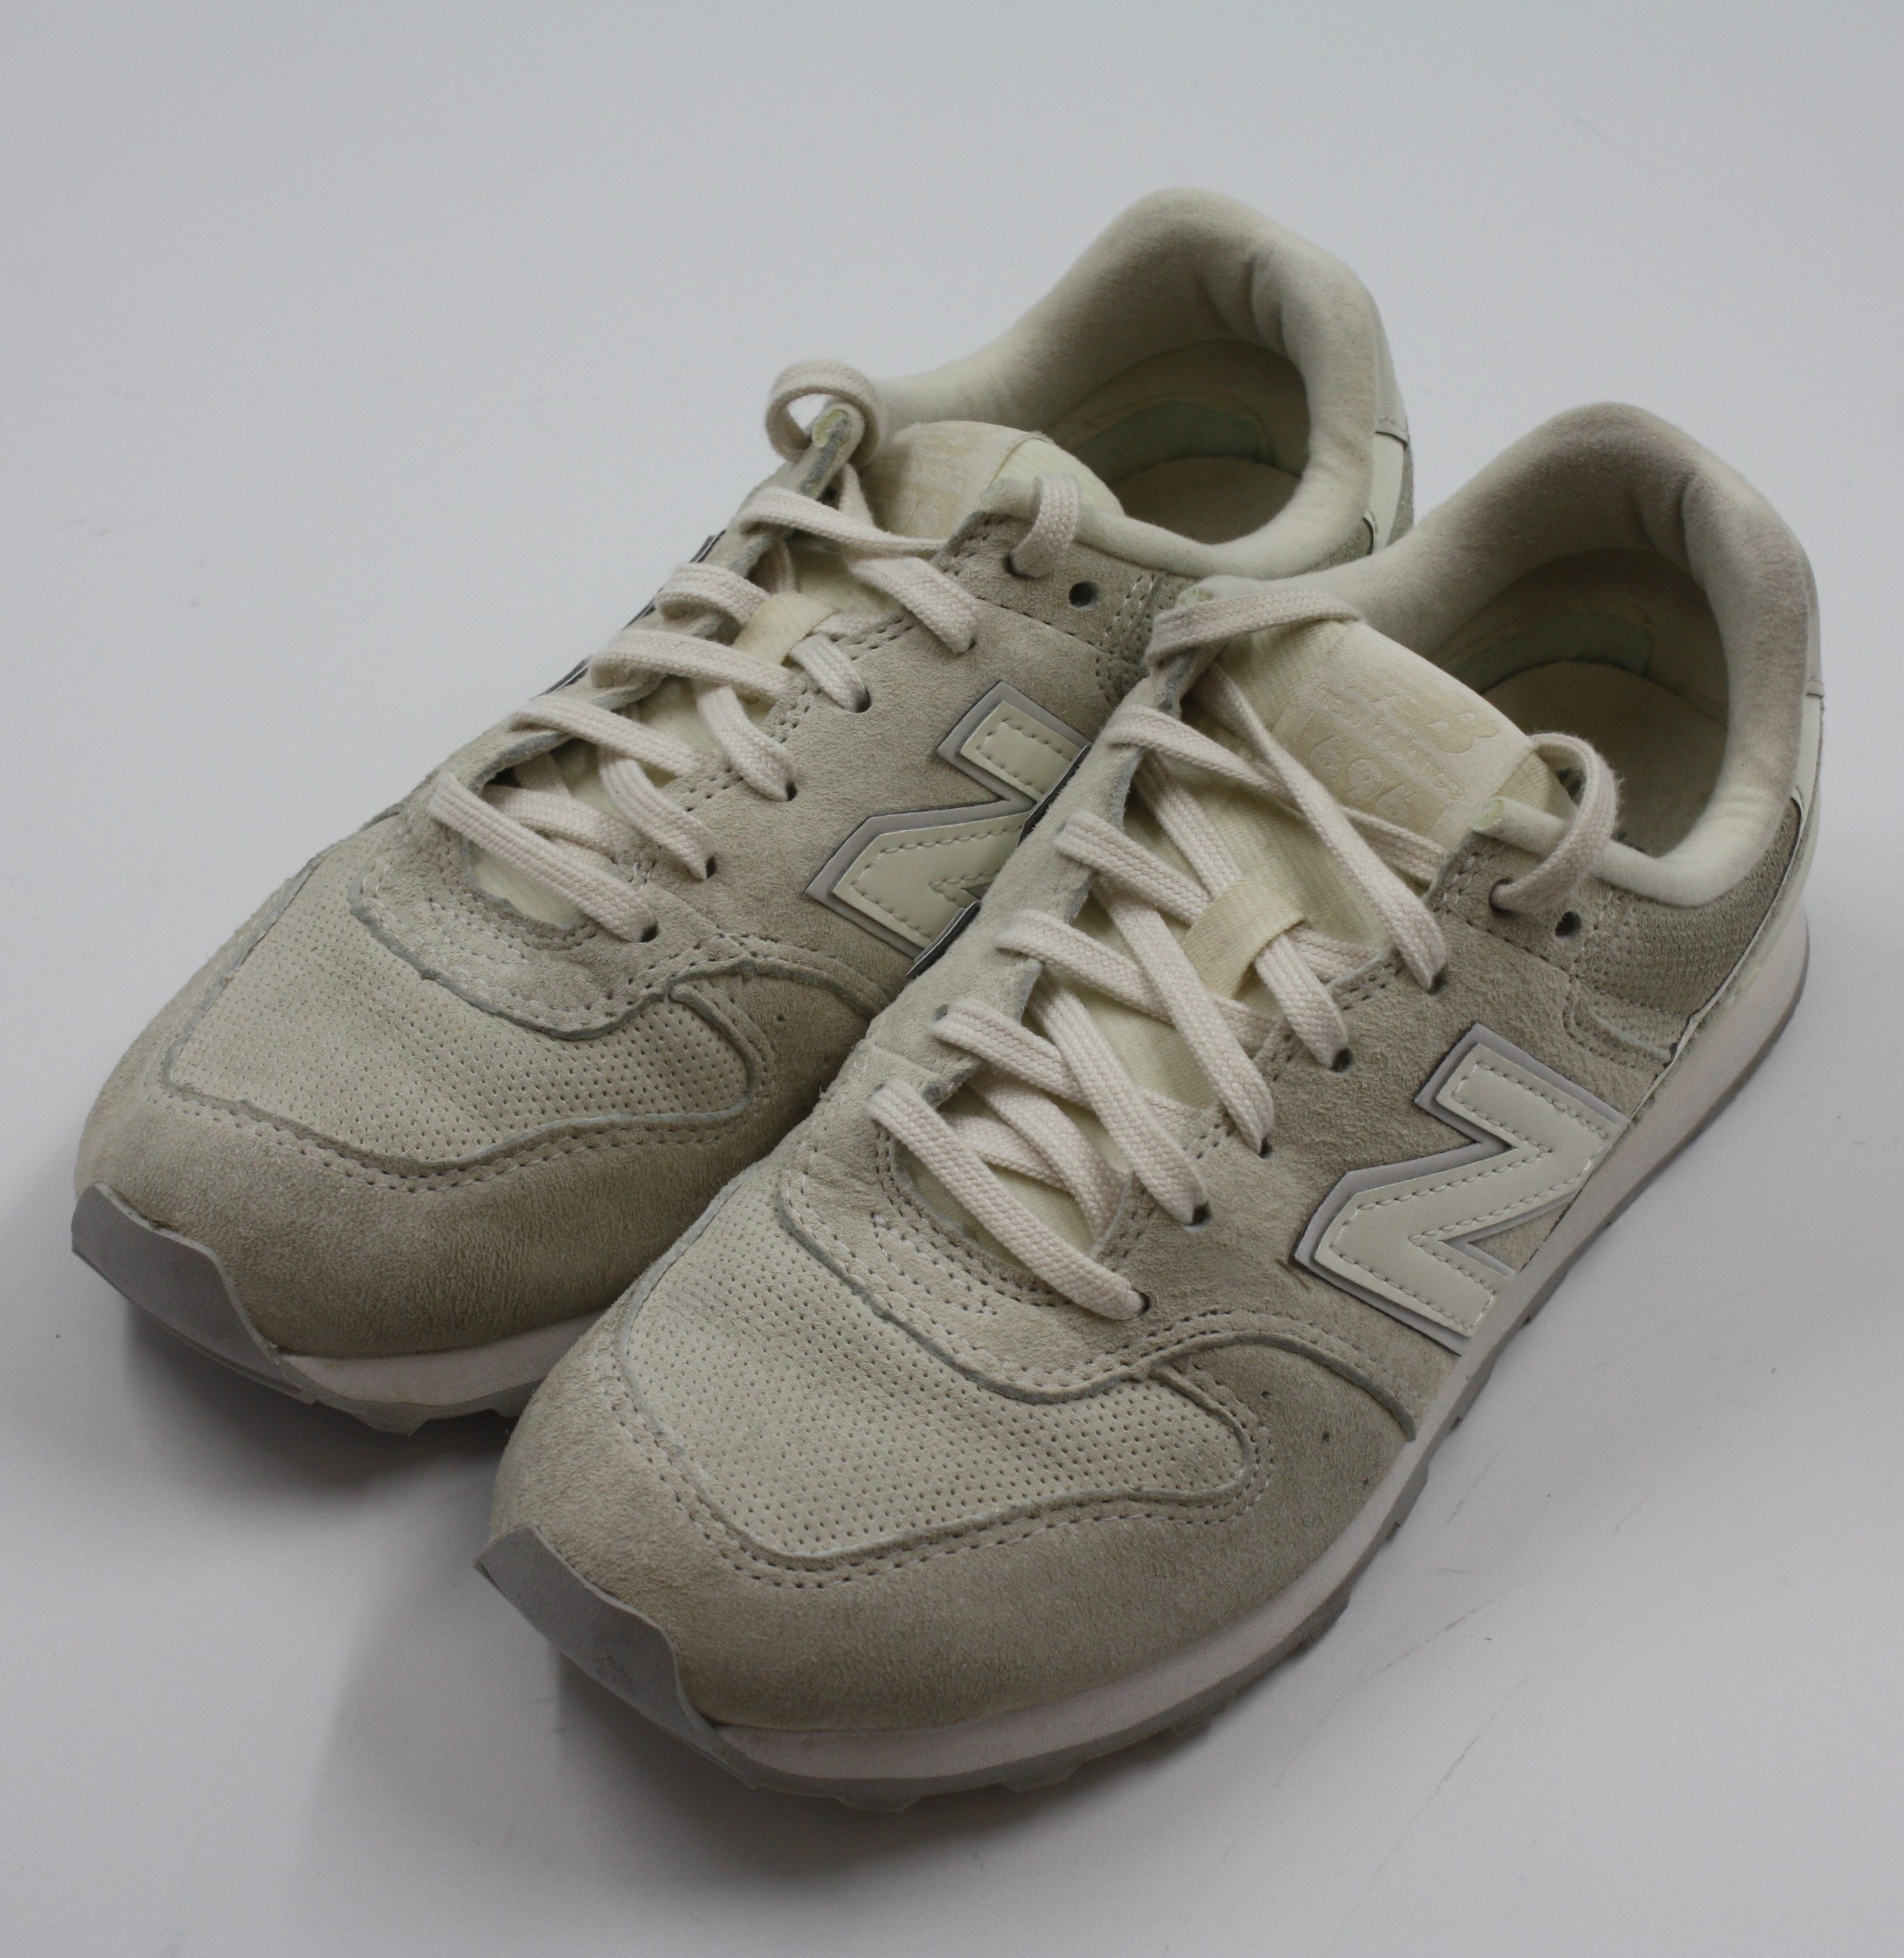 New Balance Ladies Womens Beige White Sneakers Shoes Size 7.5M | eBay